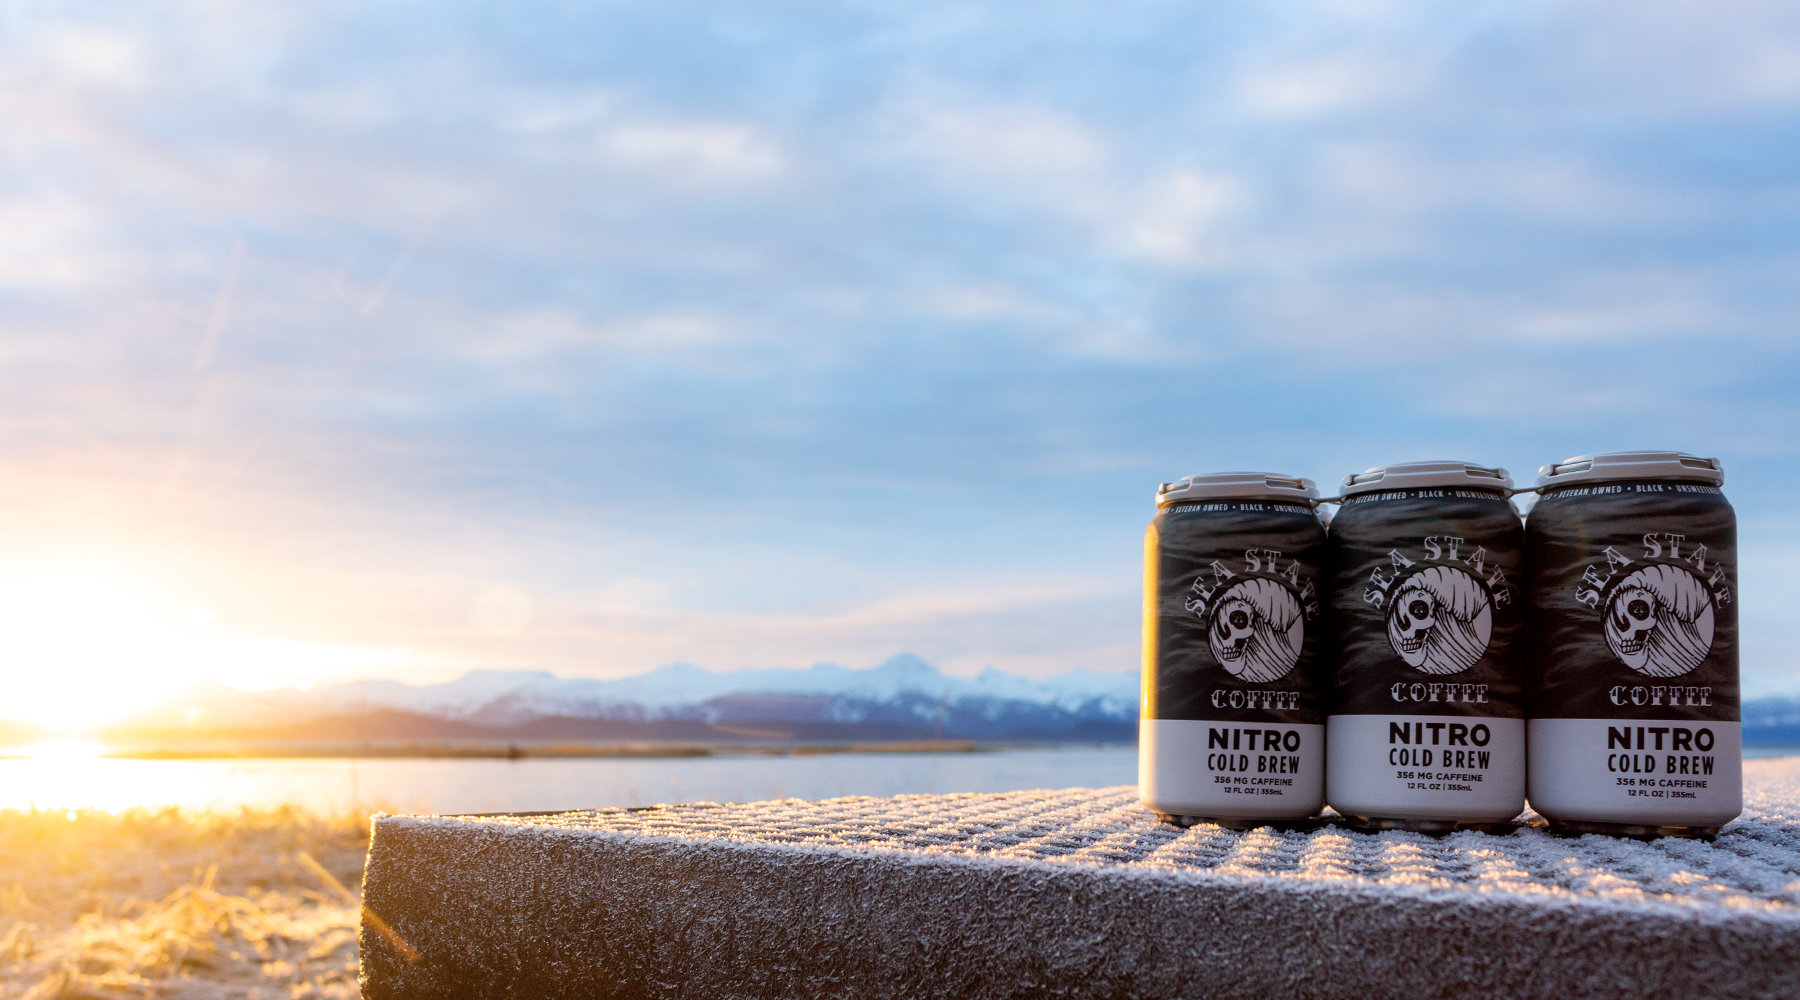 Sunset photo of the canned cold brew nitro in Alaska.